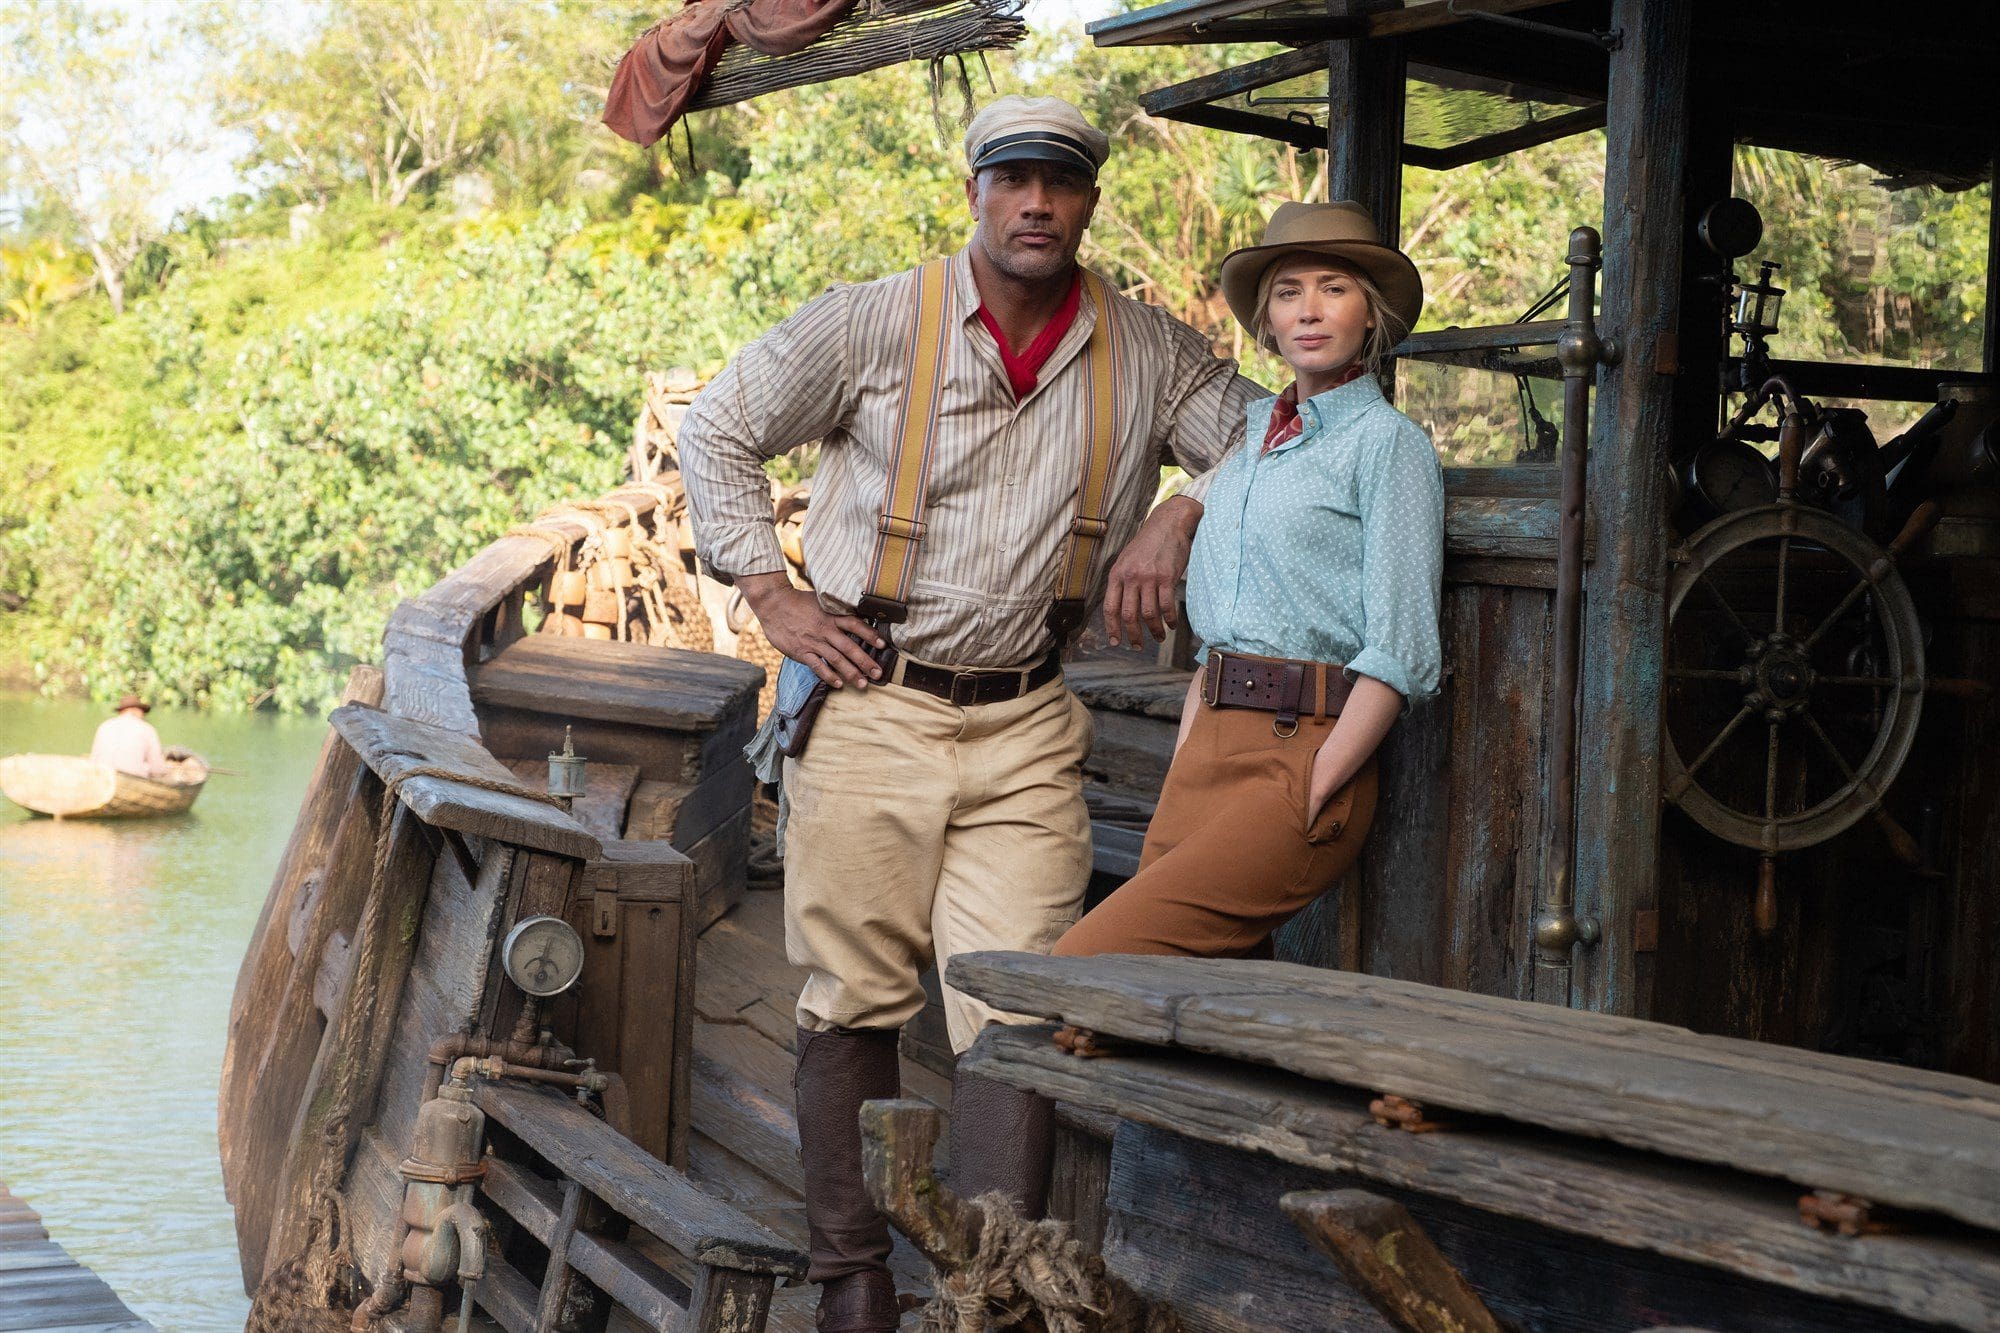 Dwayne Johnson and Emily Blunt in Disney's JUNGLE CRUISE